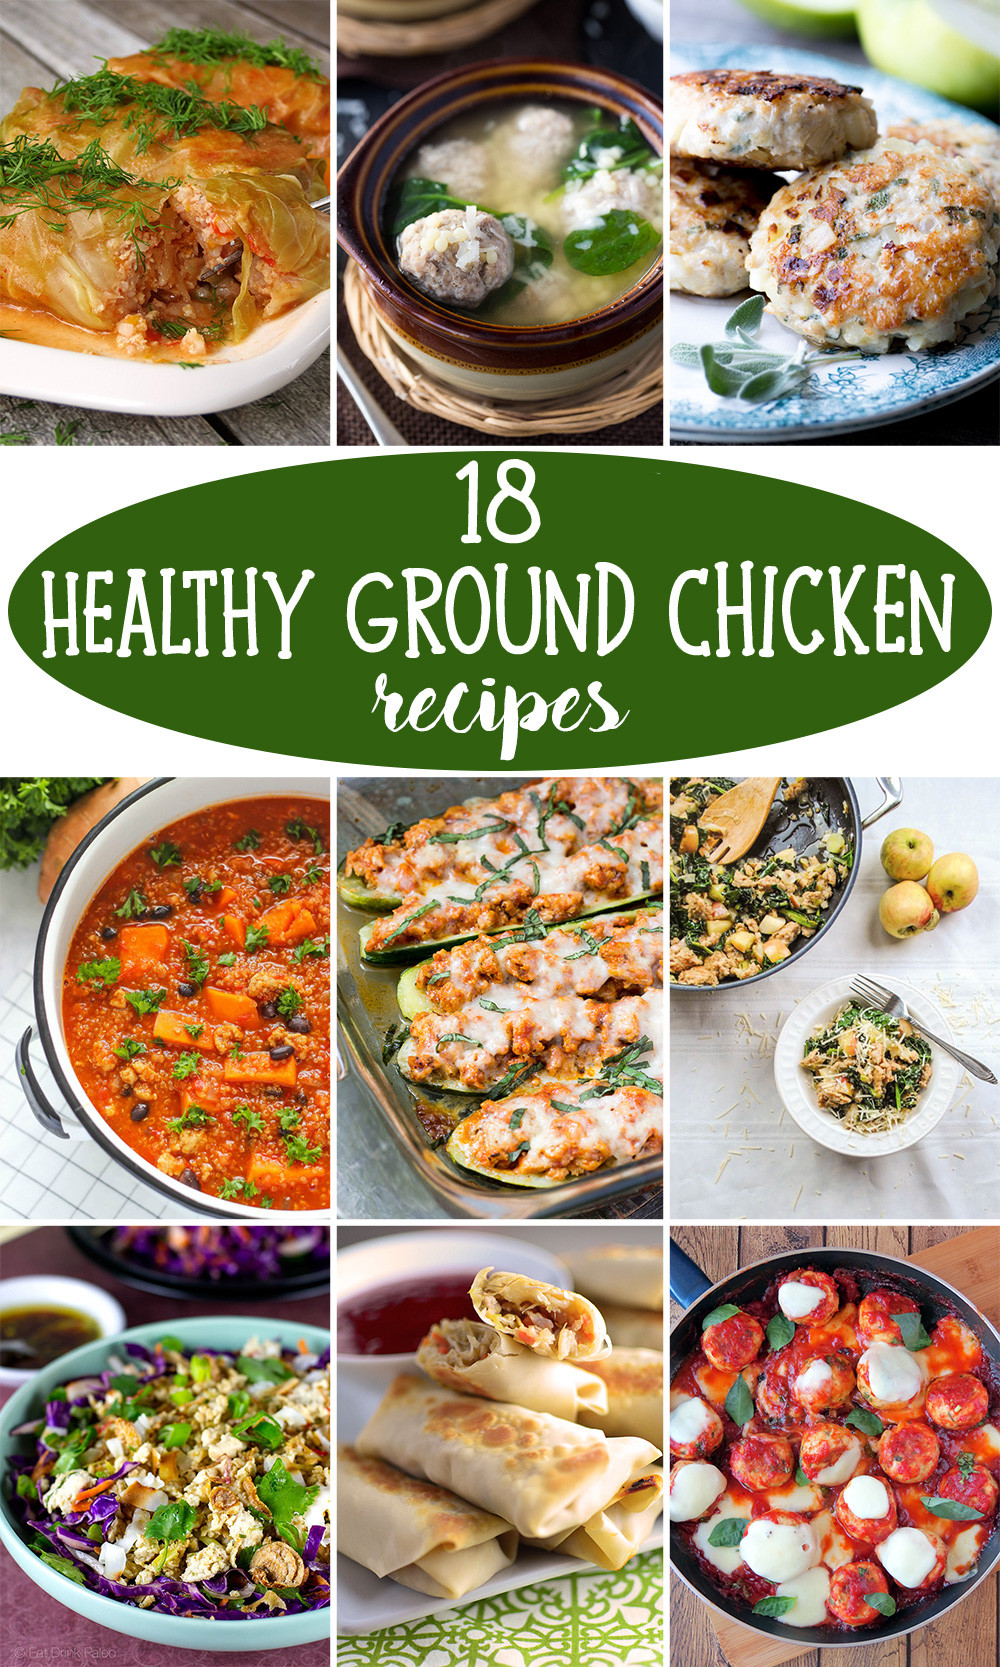 Healthy Ground Pork Recipes
 18 Healthy Ground Chicken Recipes That ll Make You Feel Great